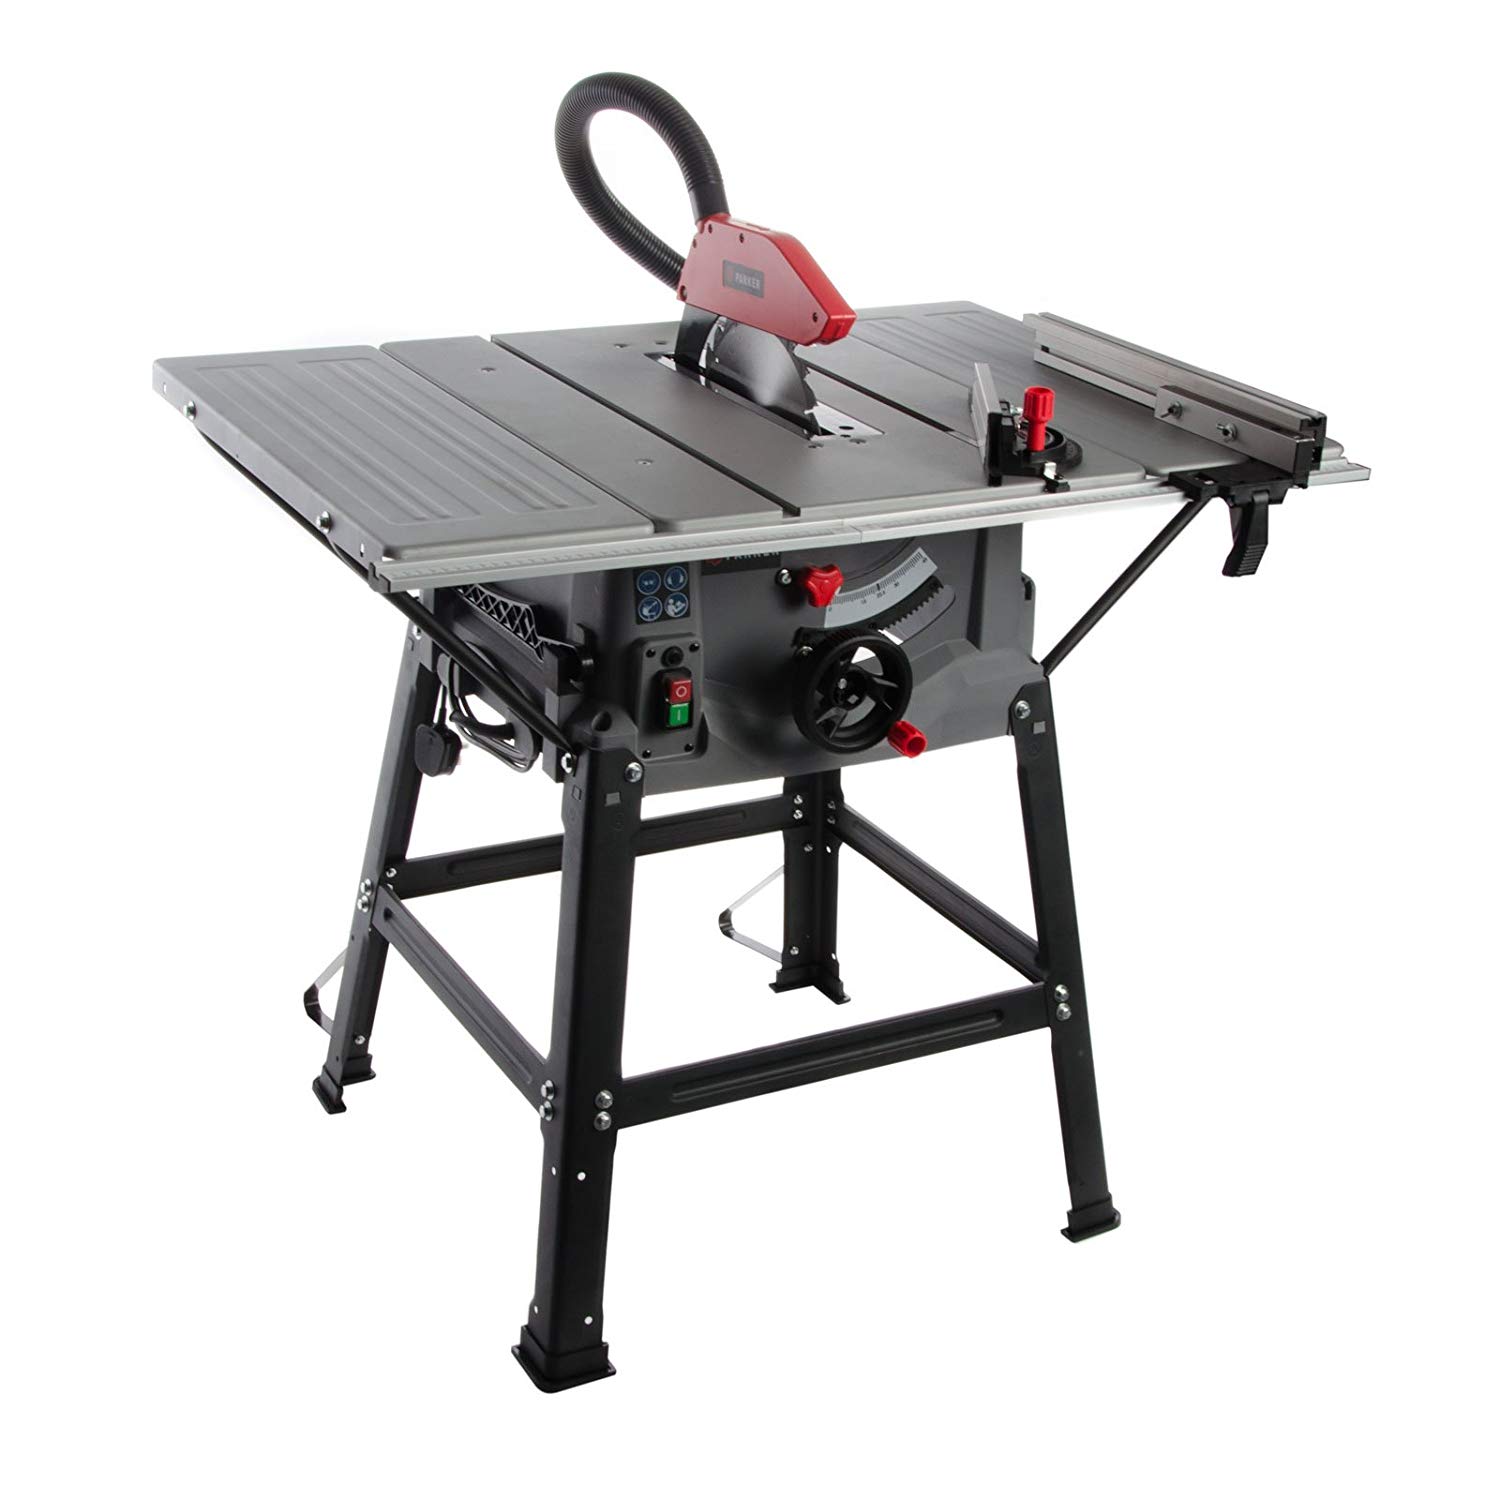 Wood Bench Saw - Eagle Plant - Tool Hire and Sales